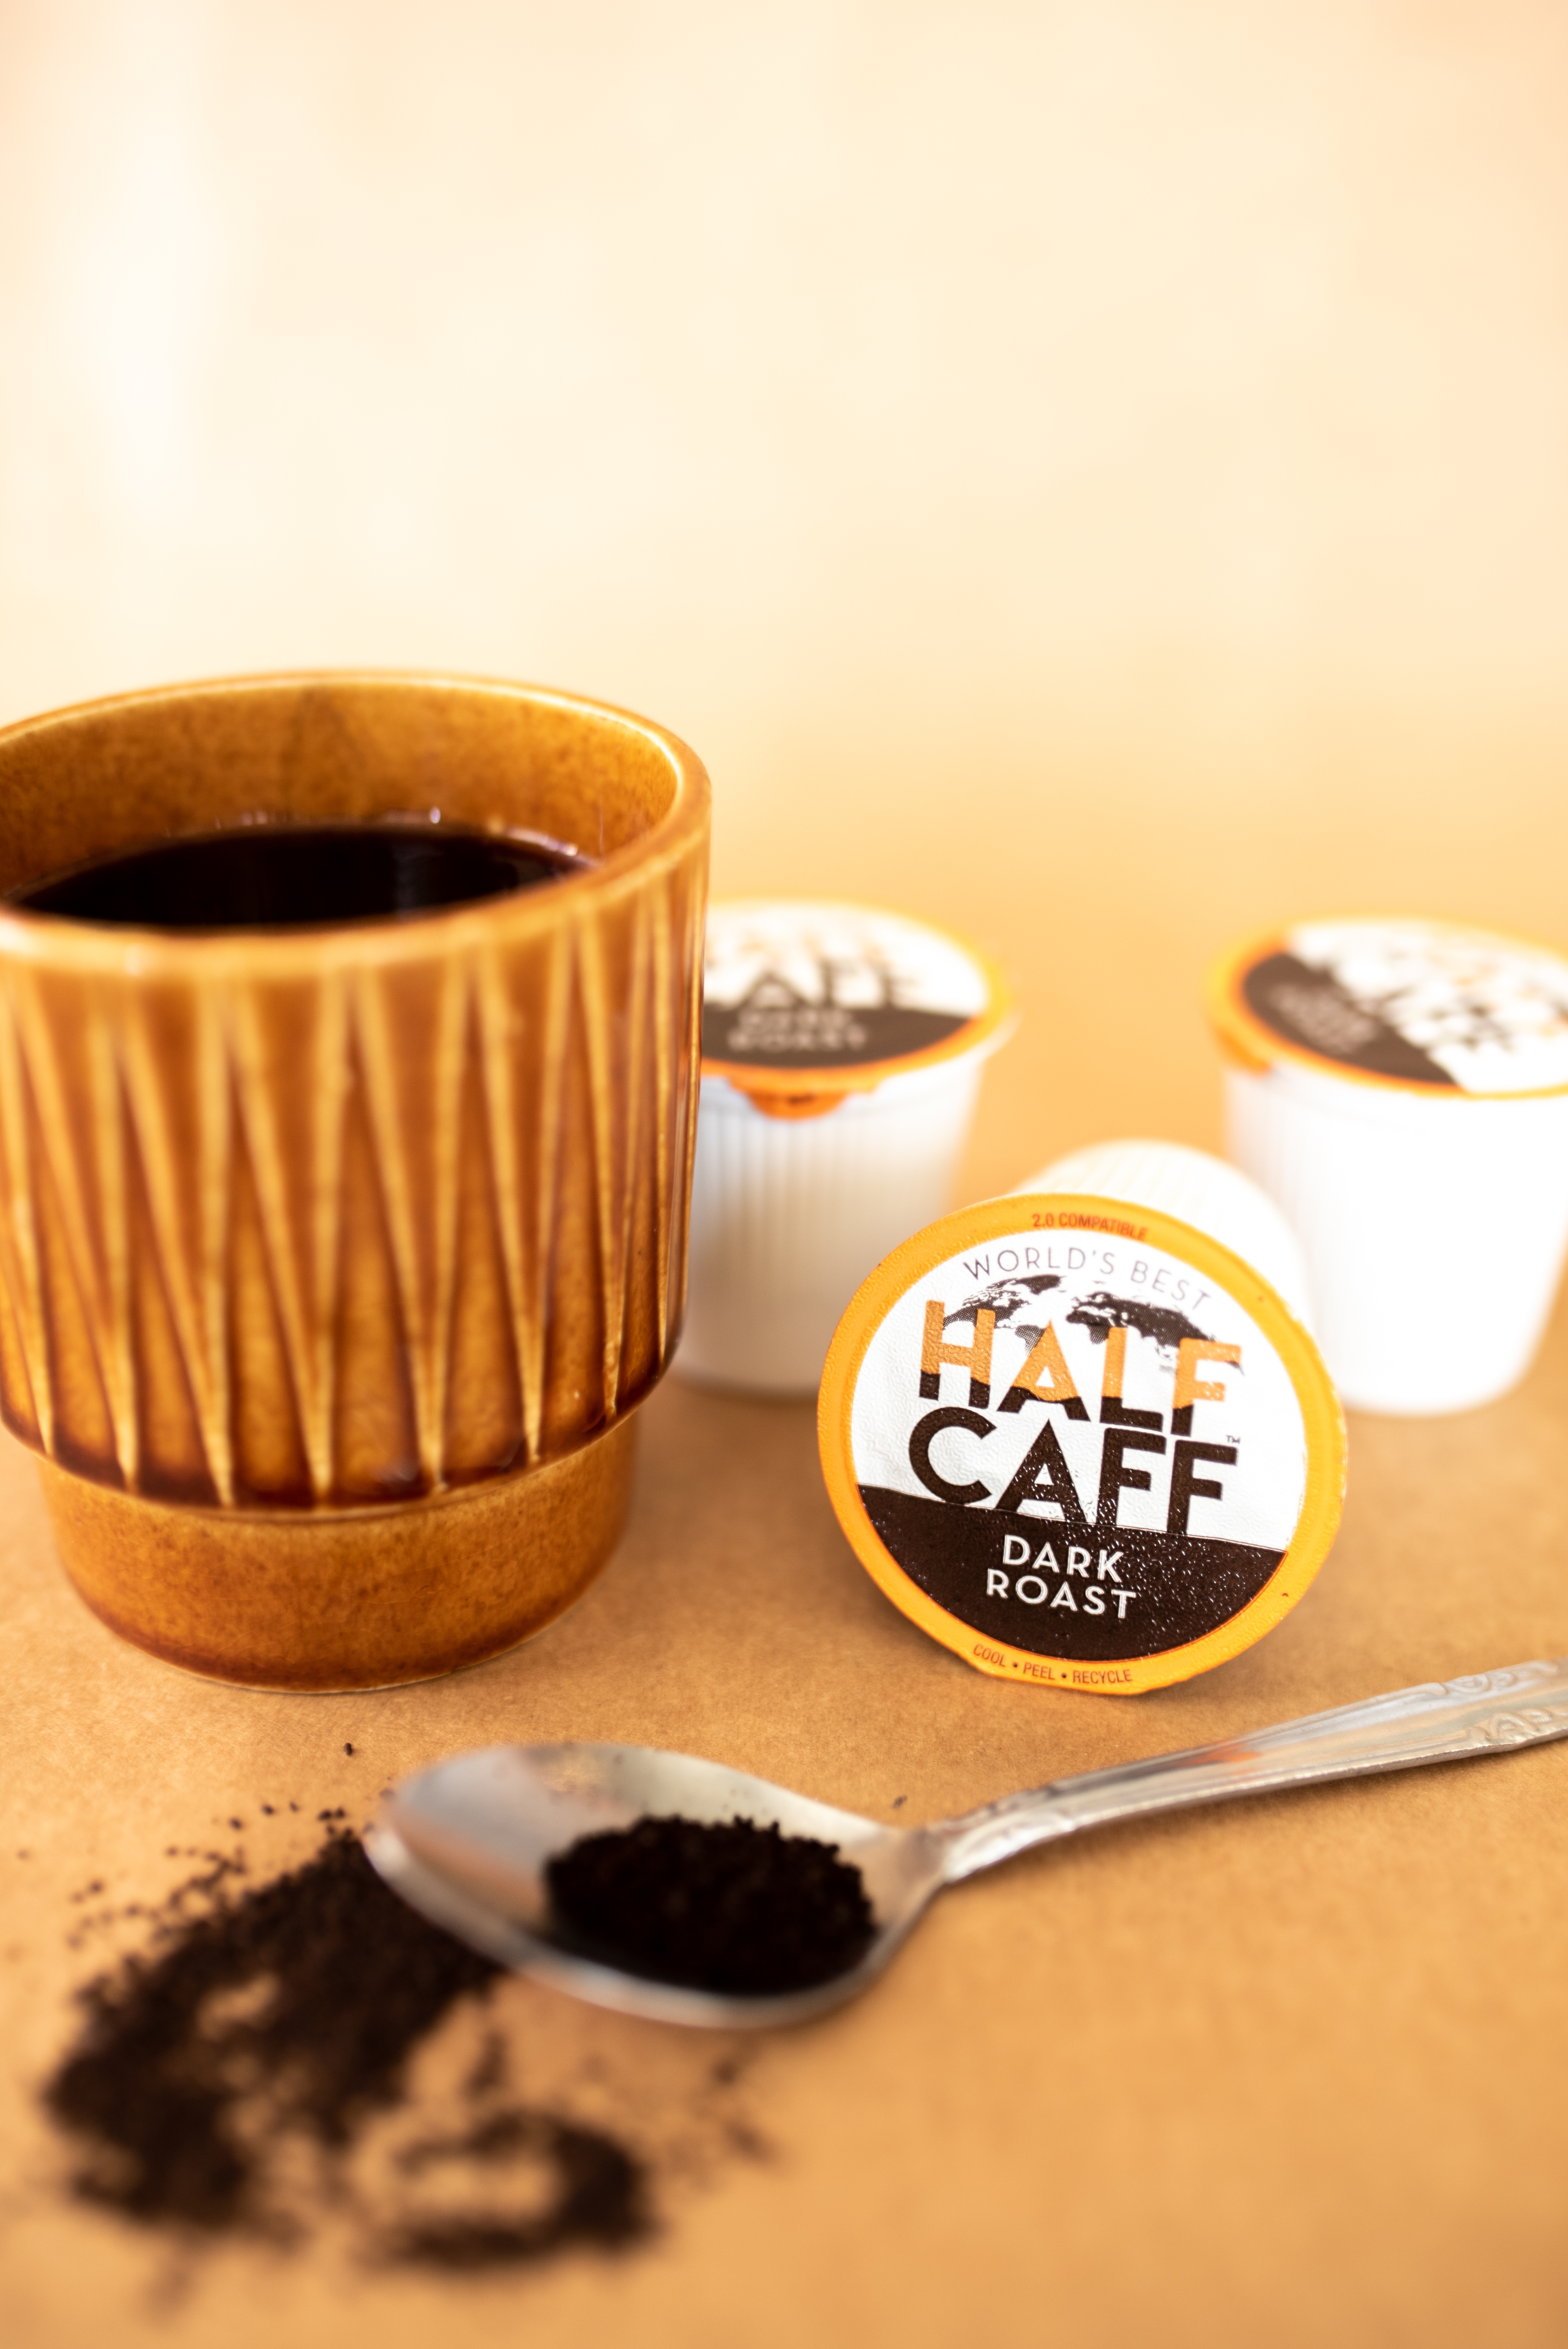 a brown cup with dark liquid inside sitting next to a spoon of coffee grounds